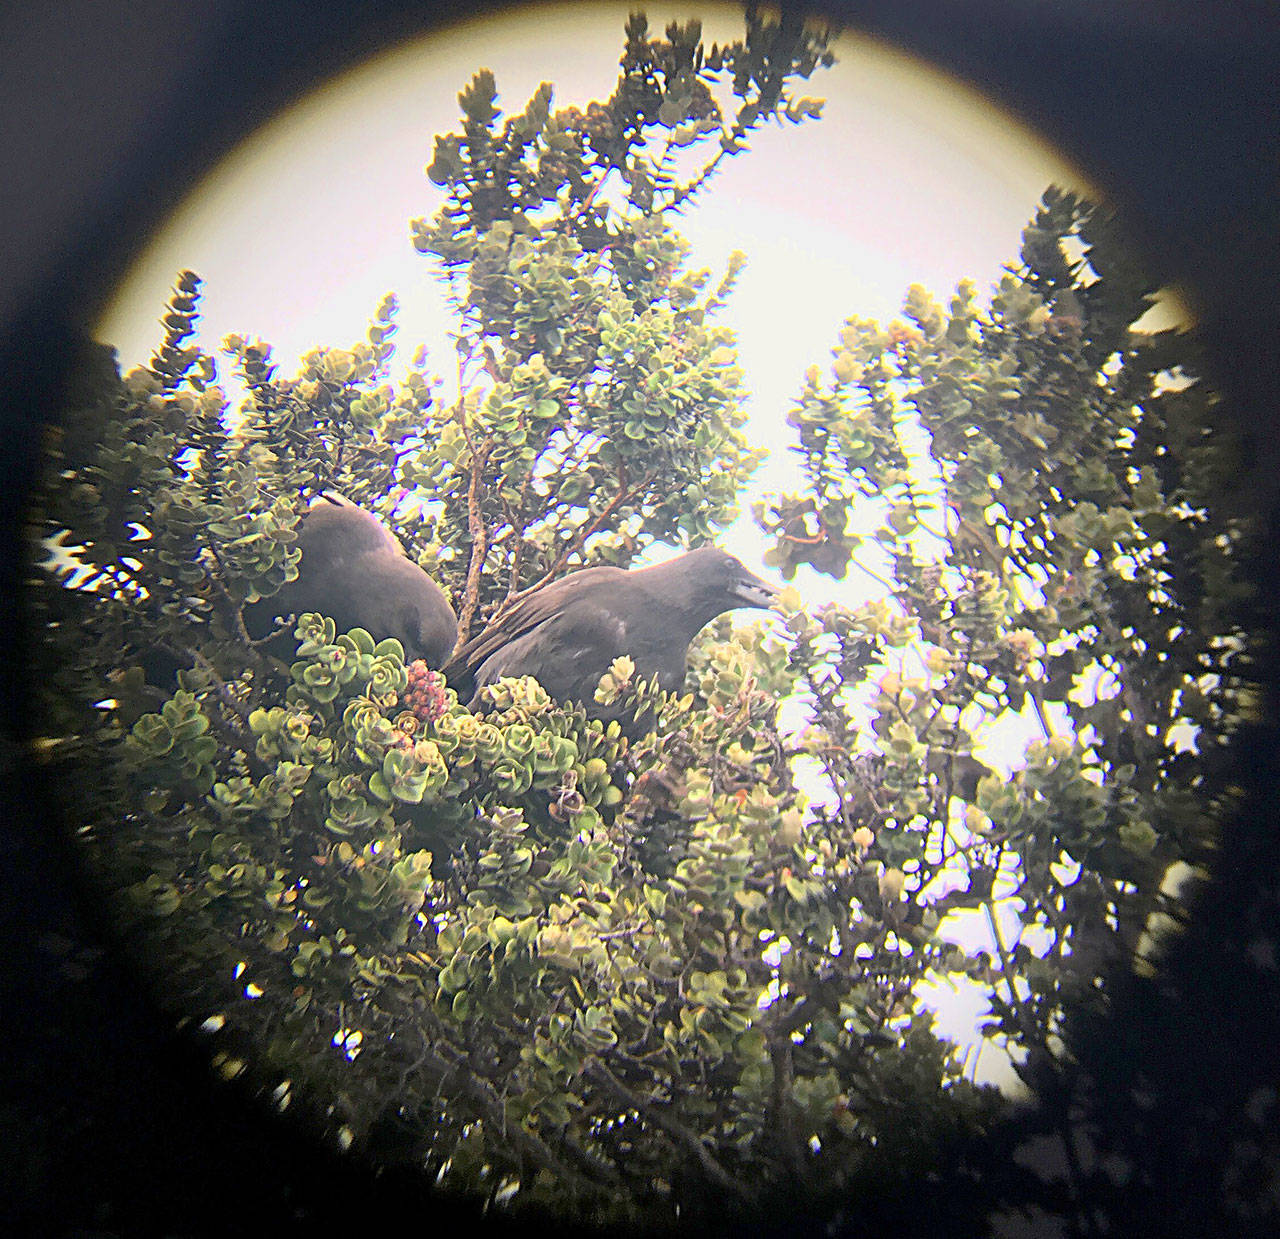 In a photo taken through binoculars, two released alala, a species of native Hawaiian crow extinct in the wild, can be seen in a nest. It’s a vital first step toward bringing back a wild population of the critically endangered birds. (San Diego Zoo Global)